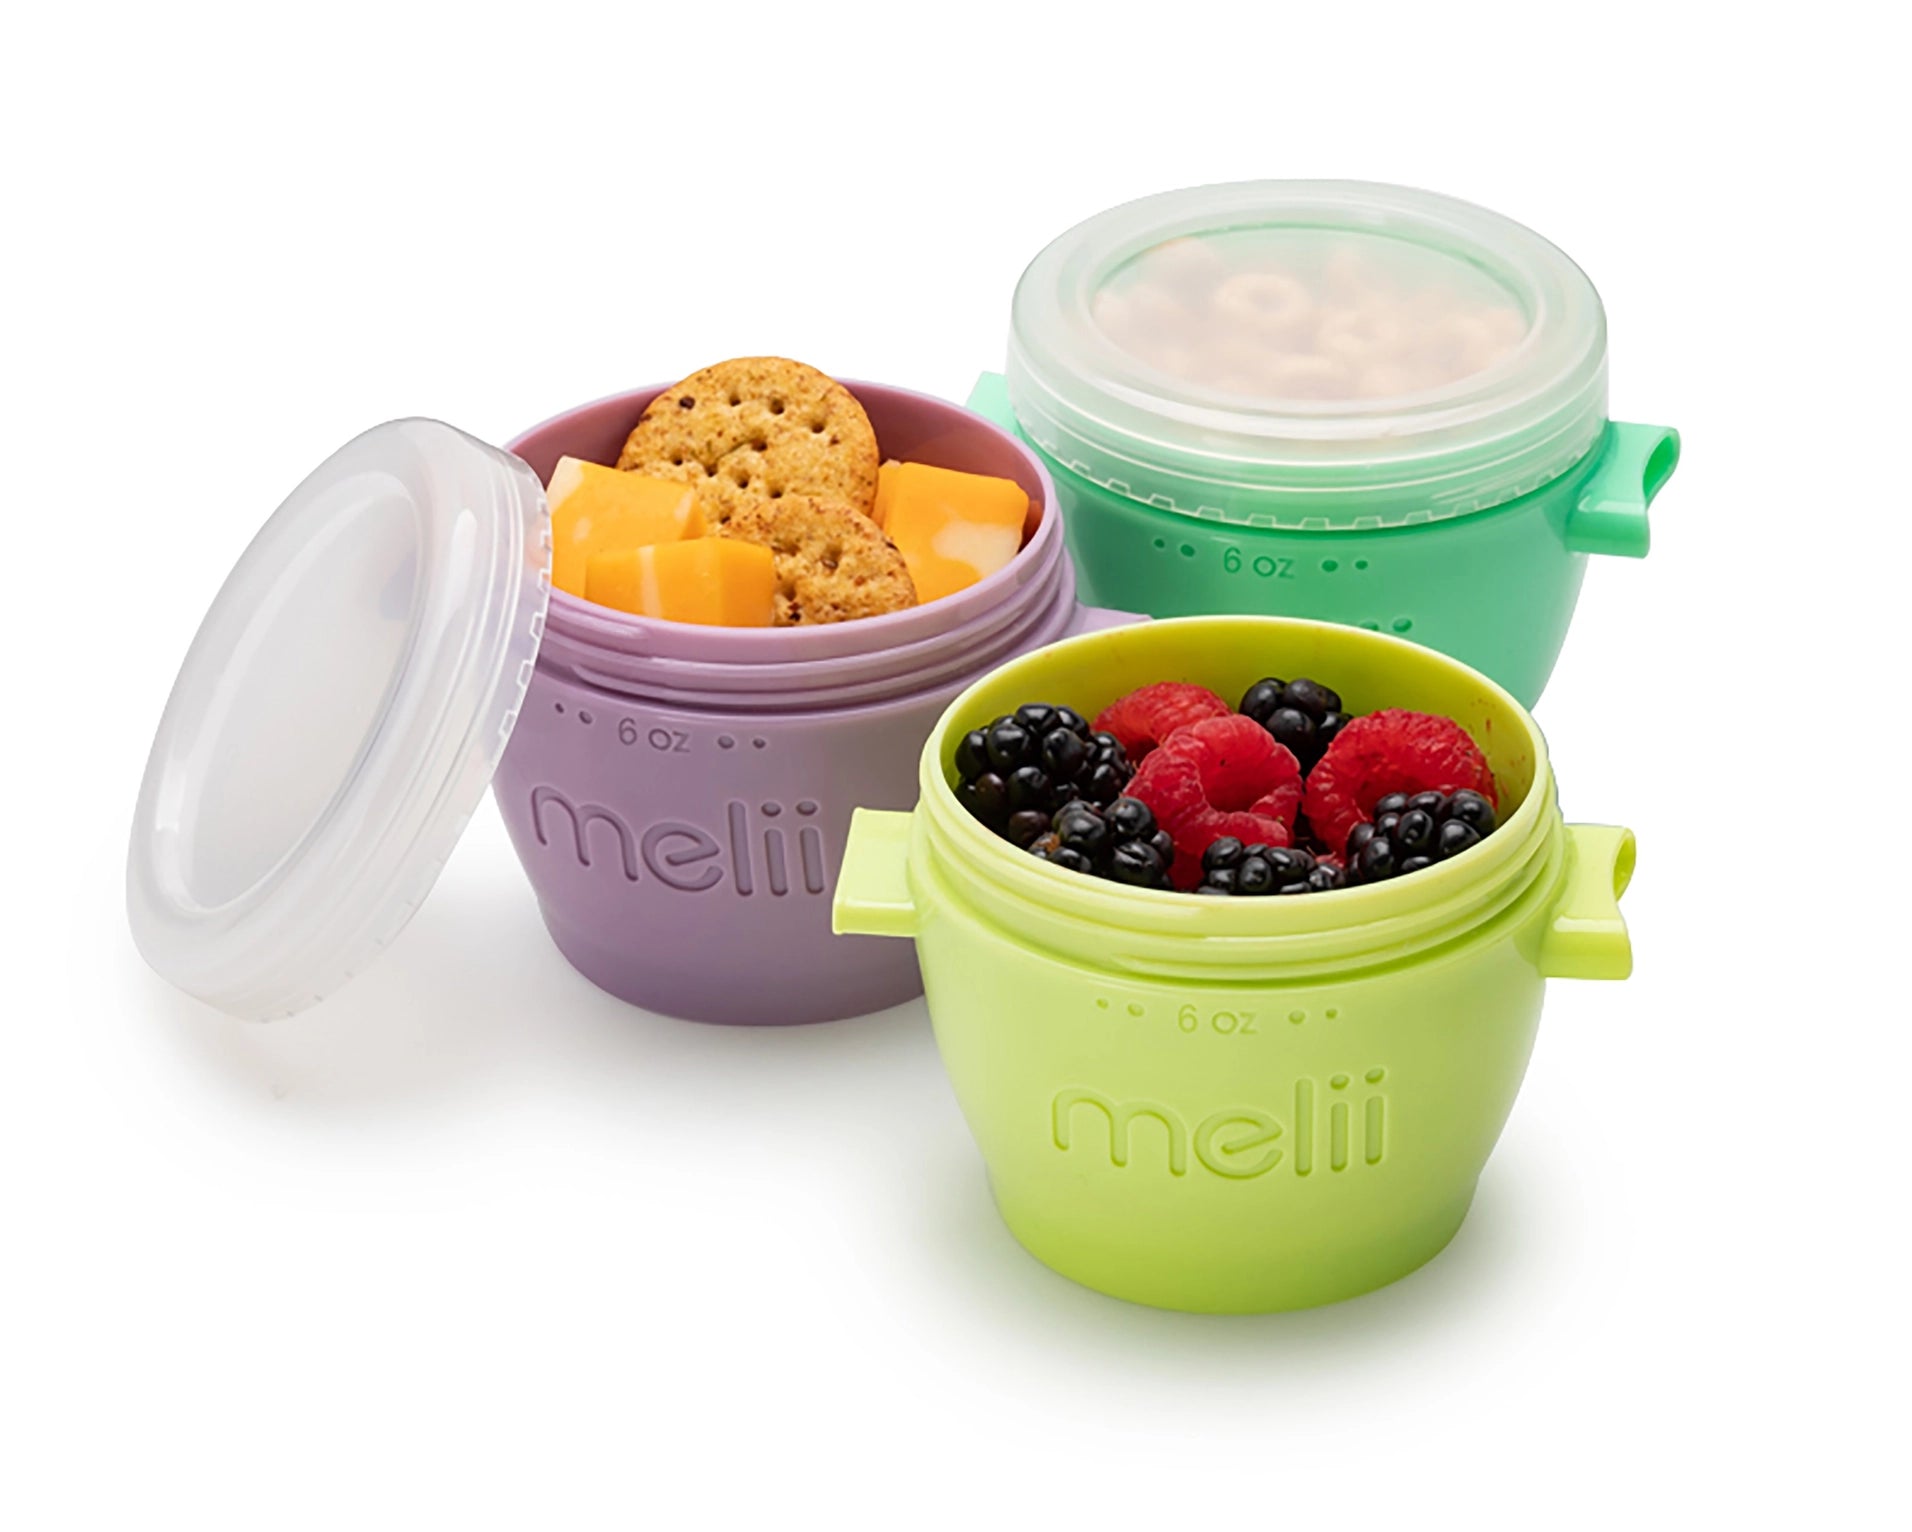 6oz Snap & Go Pods - 4 Freezer & Snack Containers